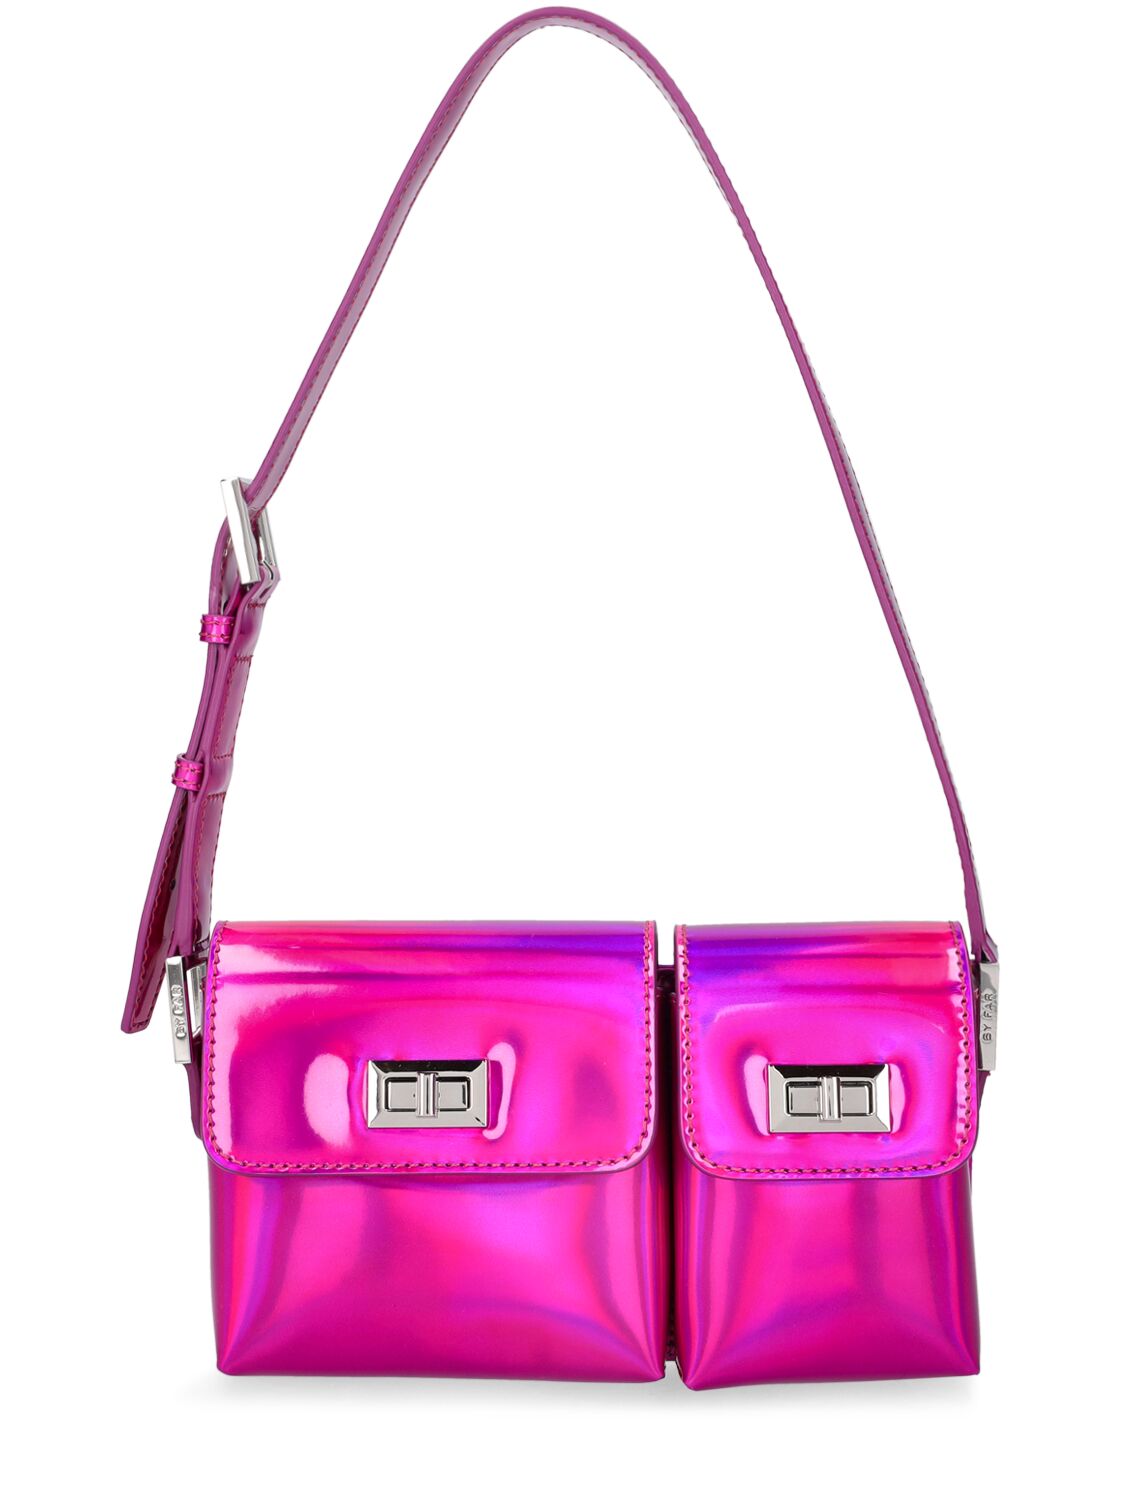 Baby Billy Iridescent Lac Shoulder Bag